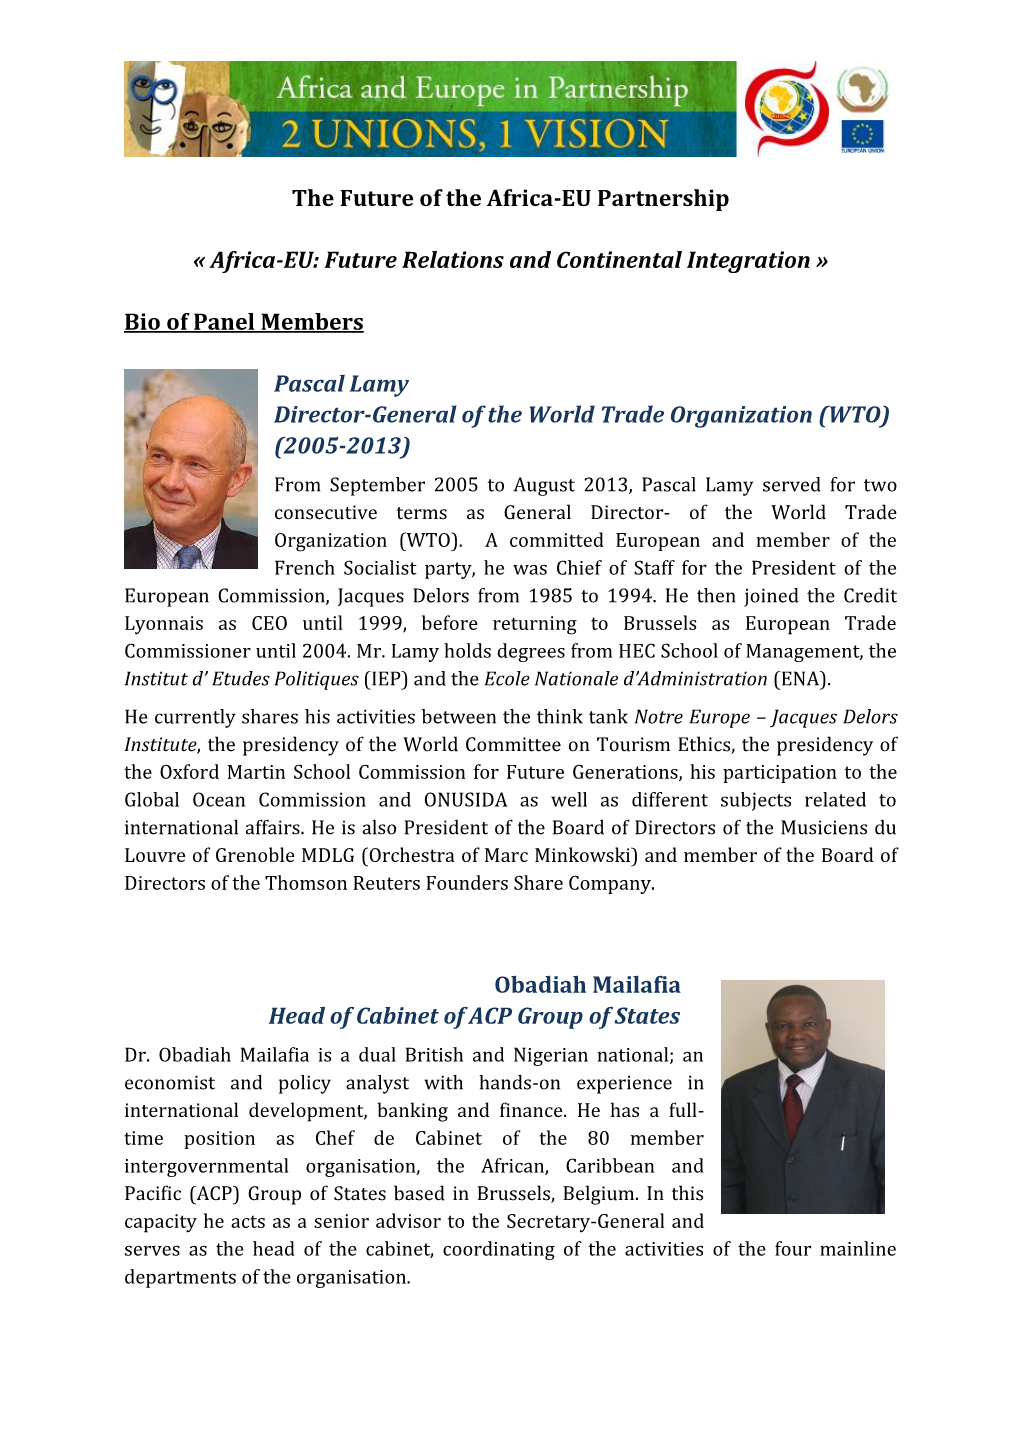 Africa-EU: Future Relations and Continental Integration » Bio Of